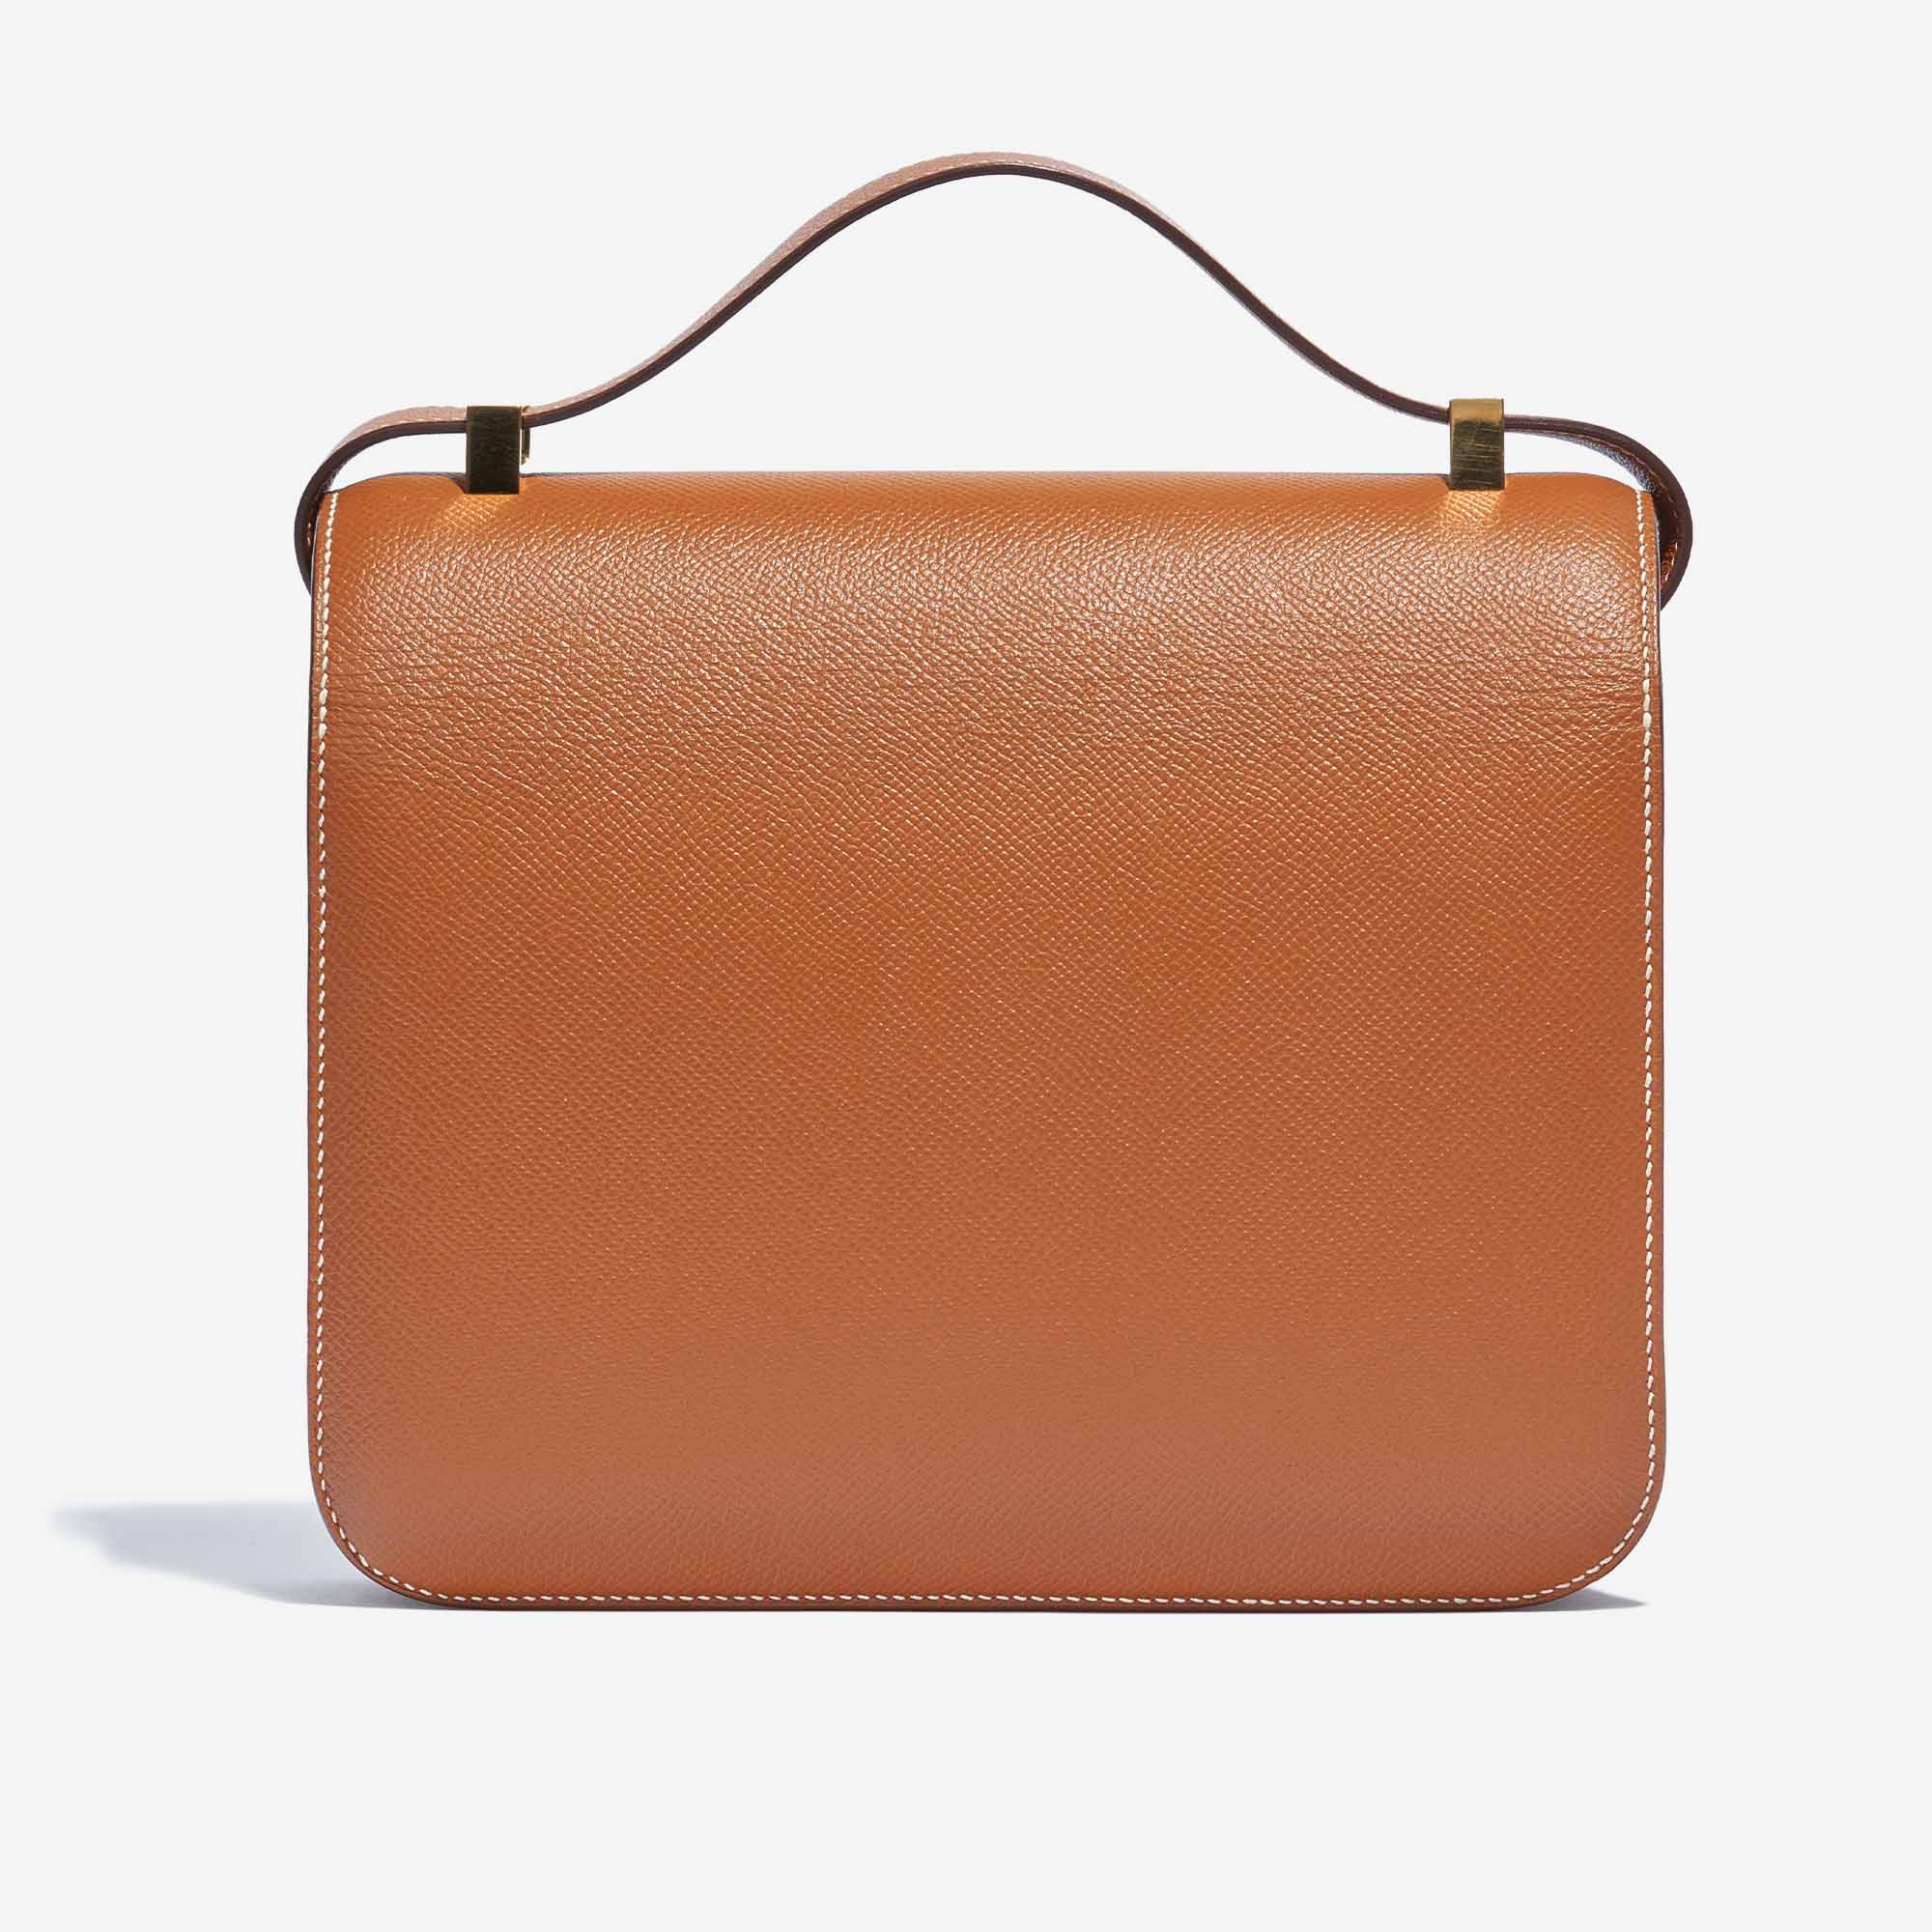 Our Love Affair with the Hermès Constance